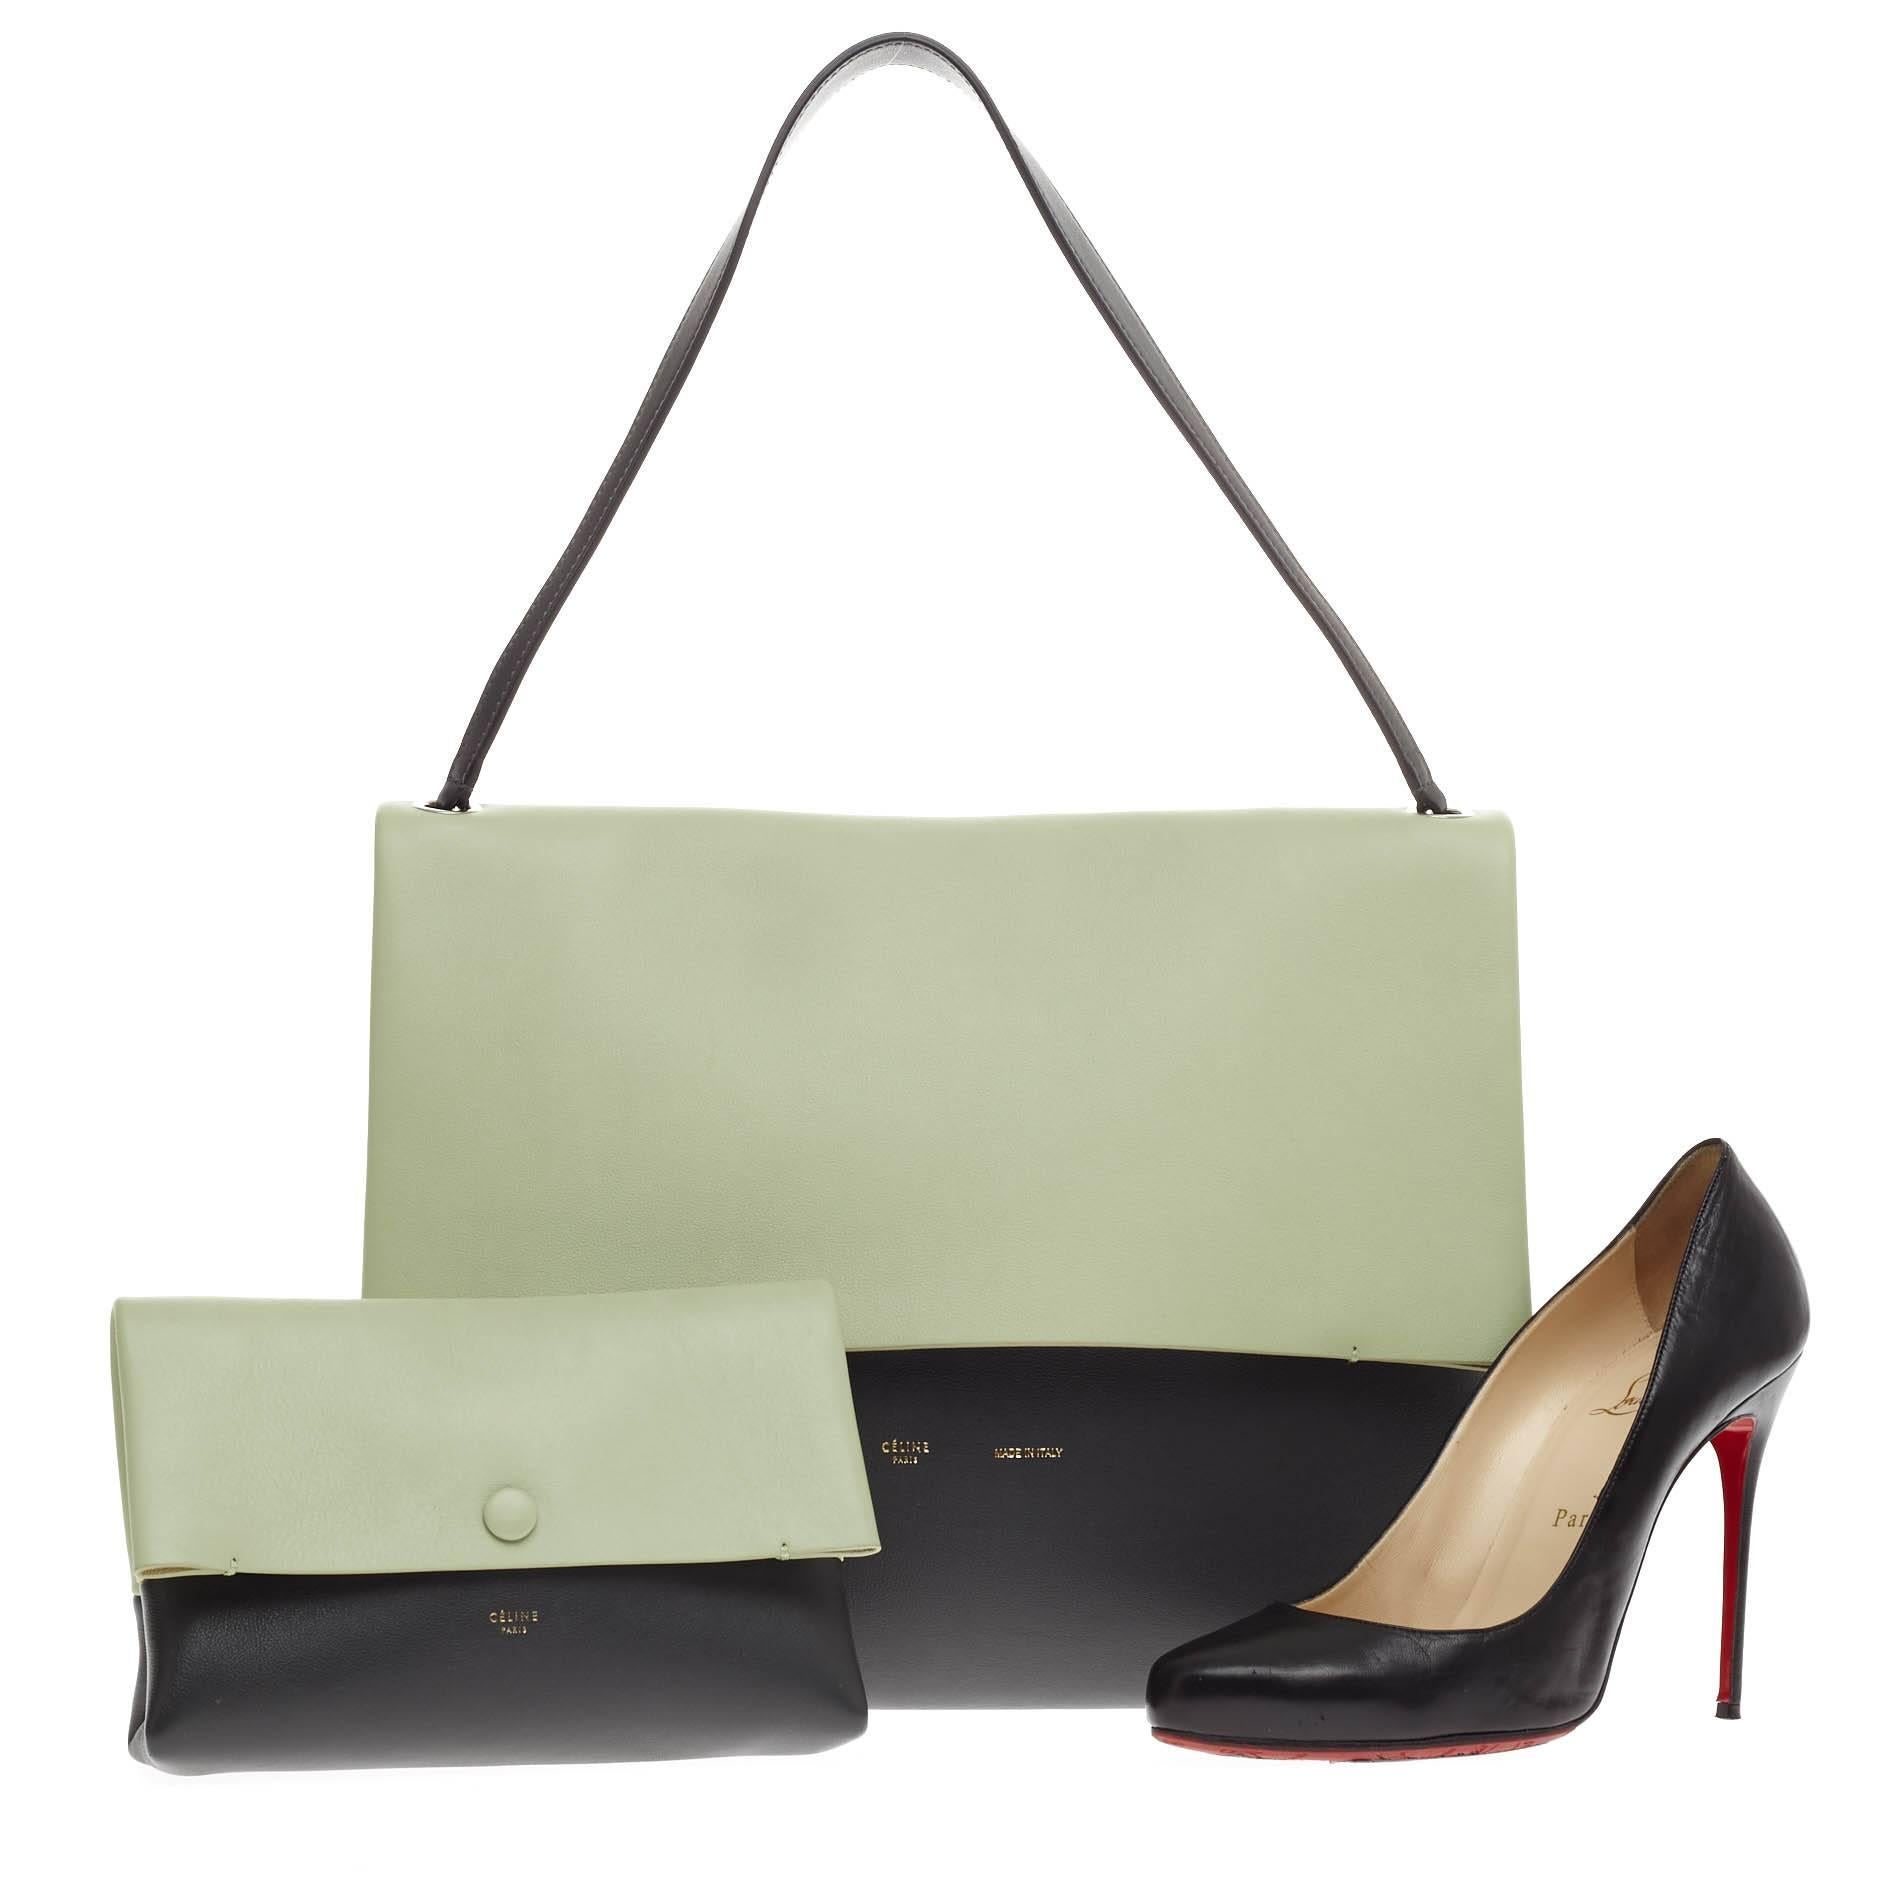 This authentic Celine All Soft Tote Leather in mint green, taupe and black color block hues showcases a neutral and understated look perfect for the modern woman. Crafted from soft calfskin leather, this no-fuss tote features a single handle leather